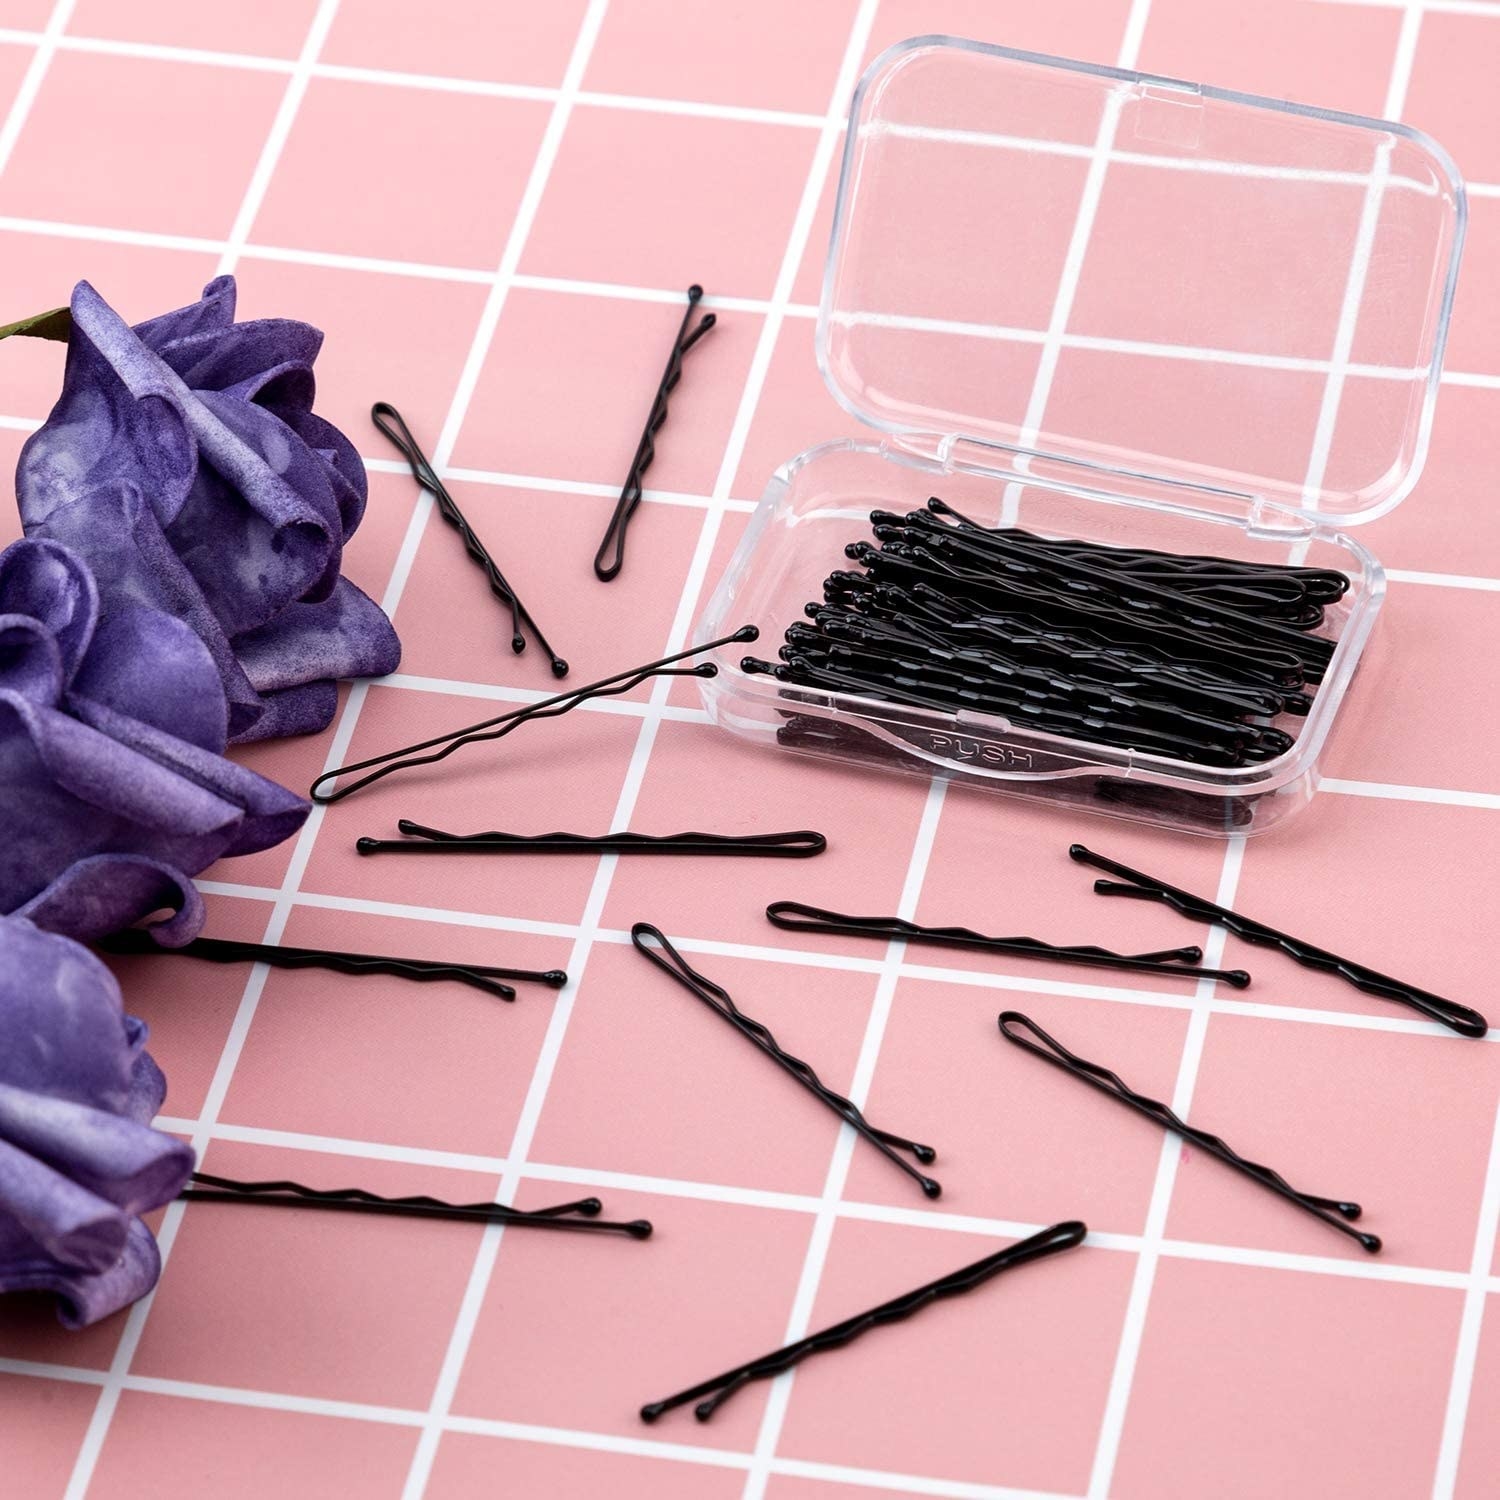 The open case of bobby pins surrounded by several bobby pins and flowers